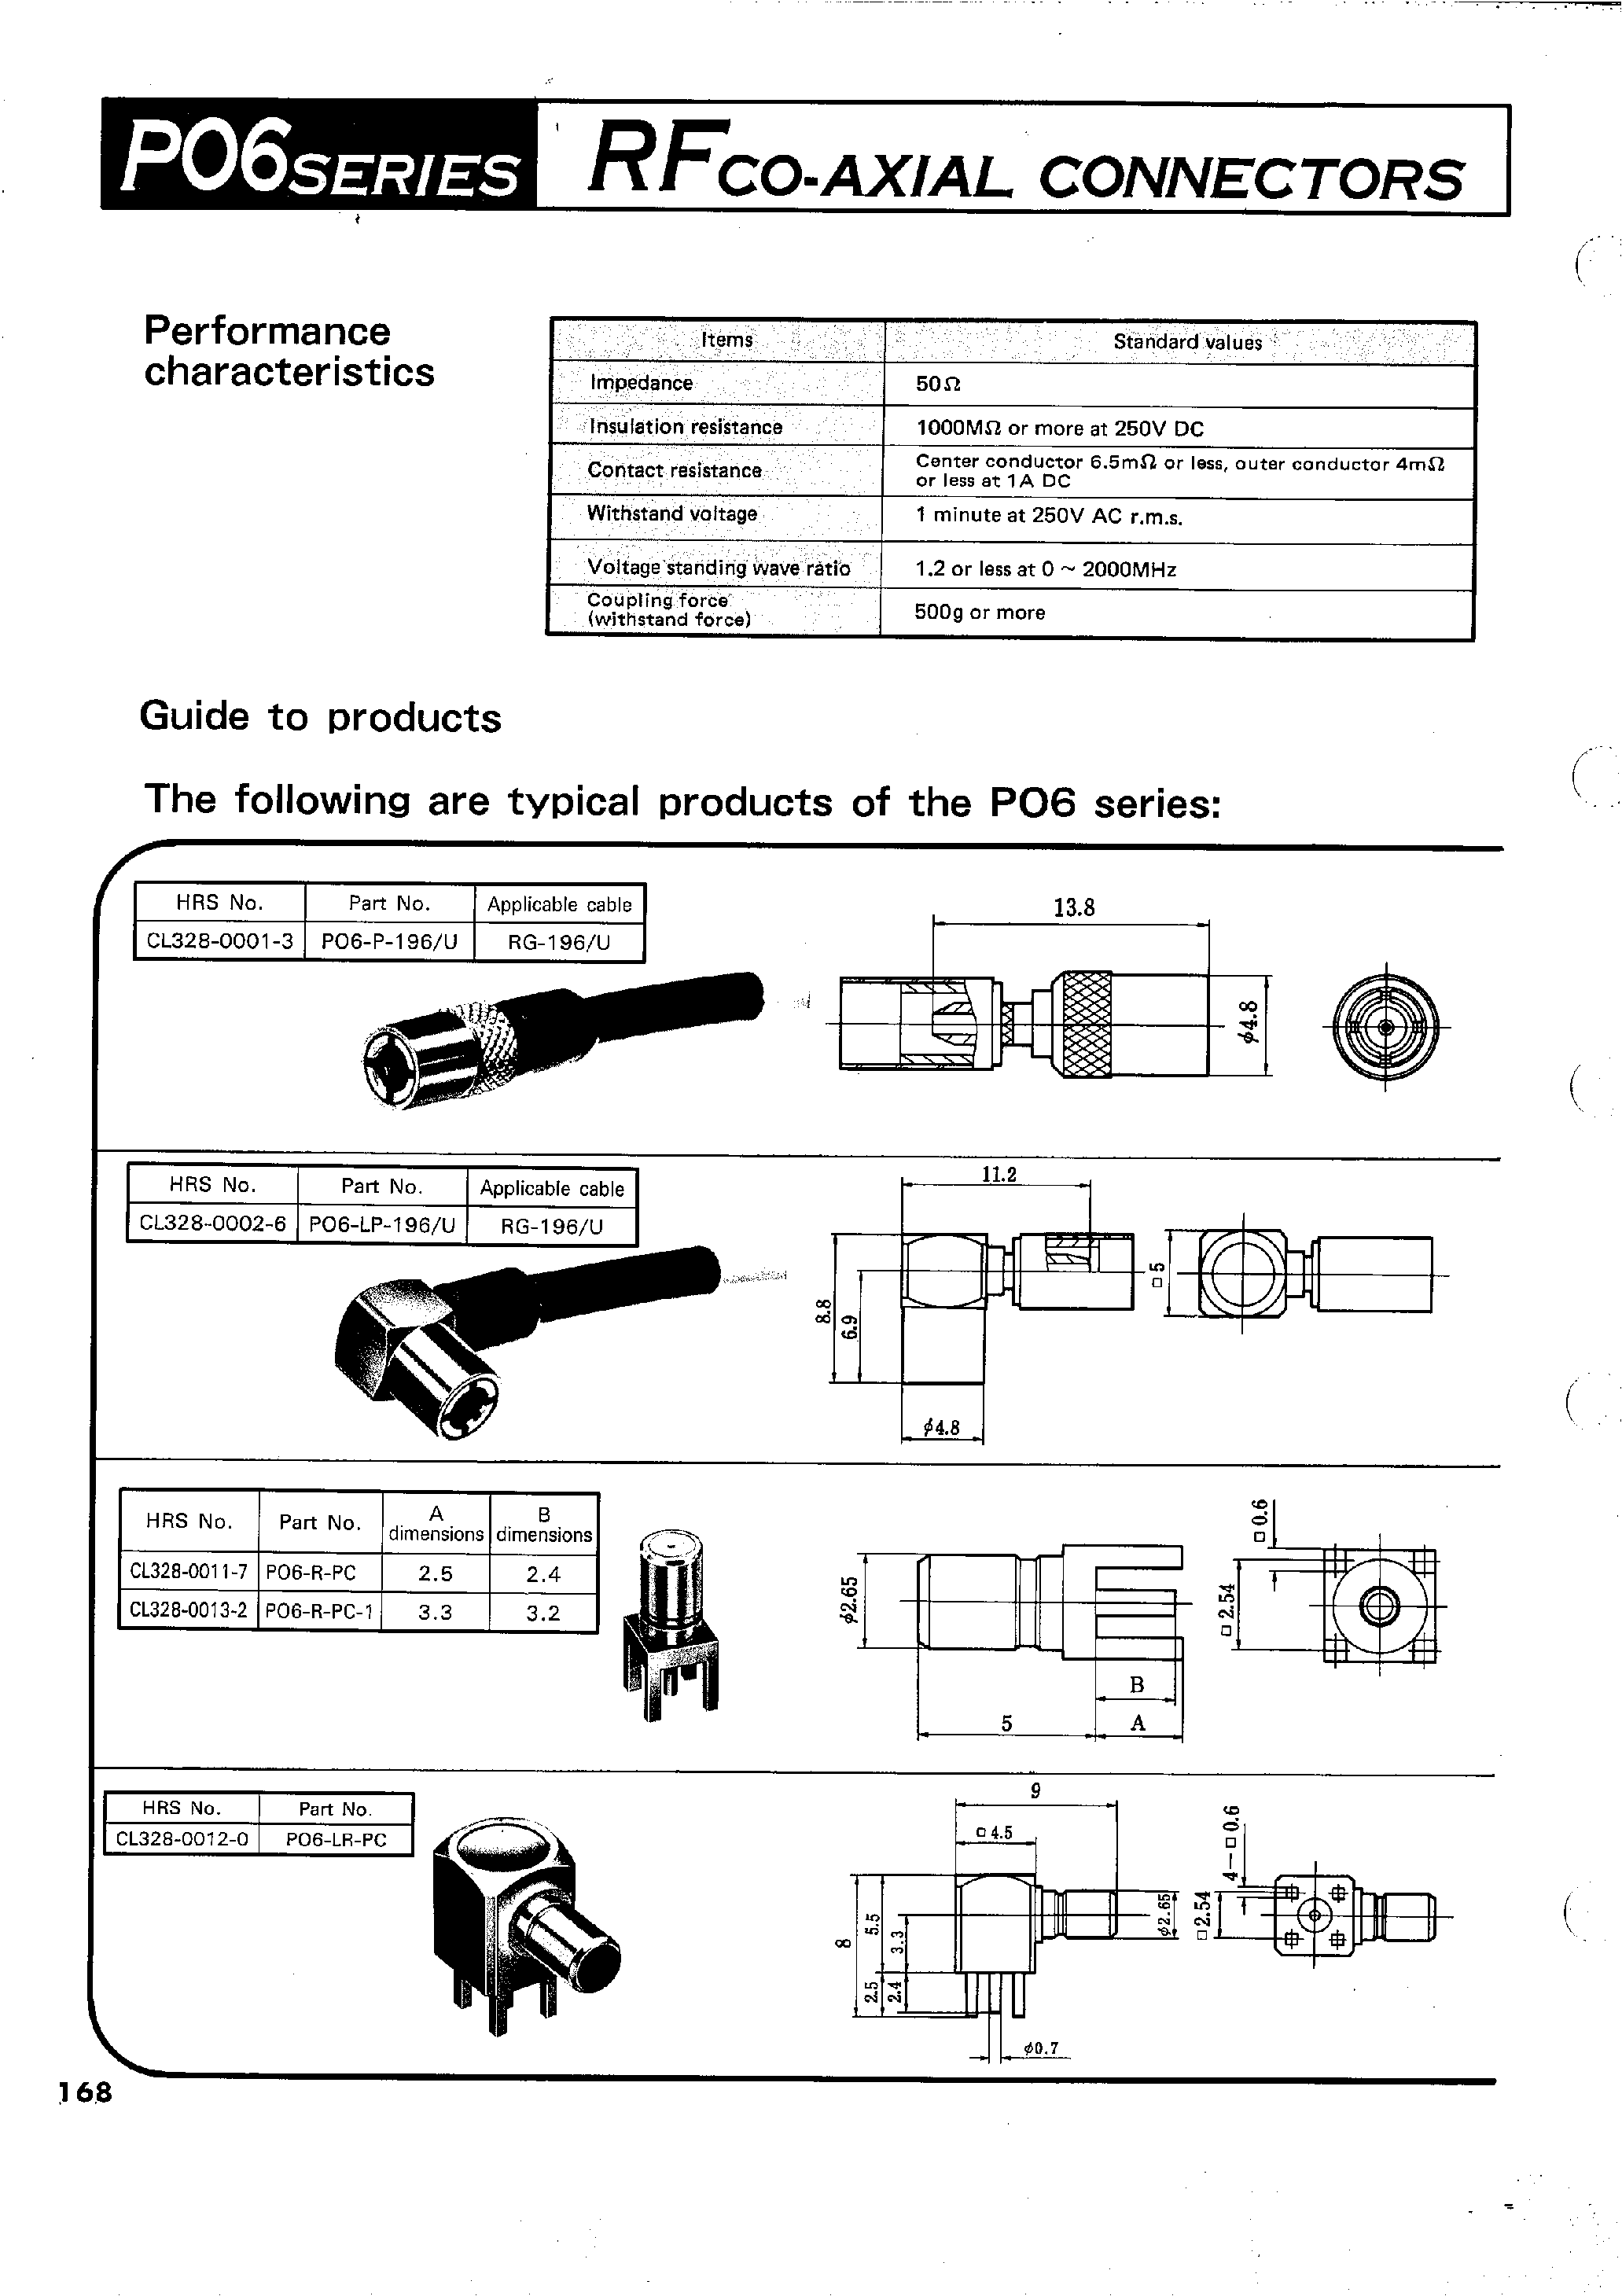 Datasheet PO6-R-PC-1 - RFCO-AXIAL CONNECTORS(Low-profile ultrasmall coaxial connector) page 2